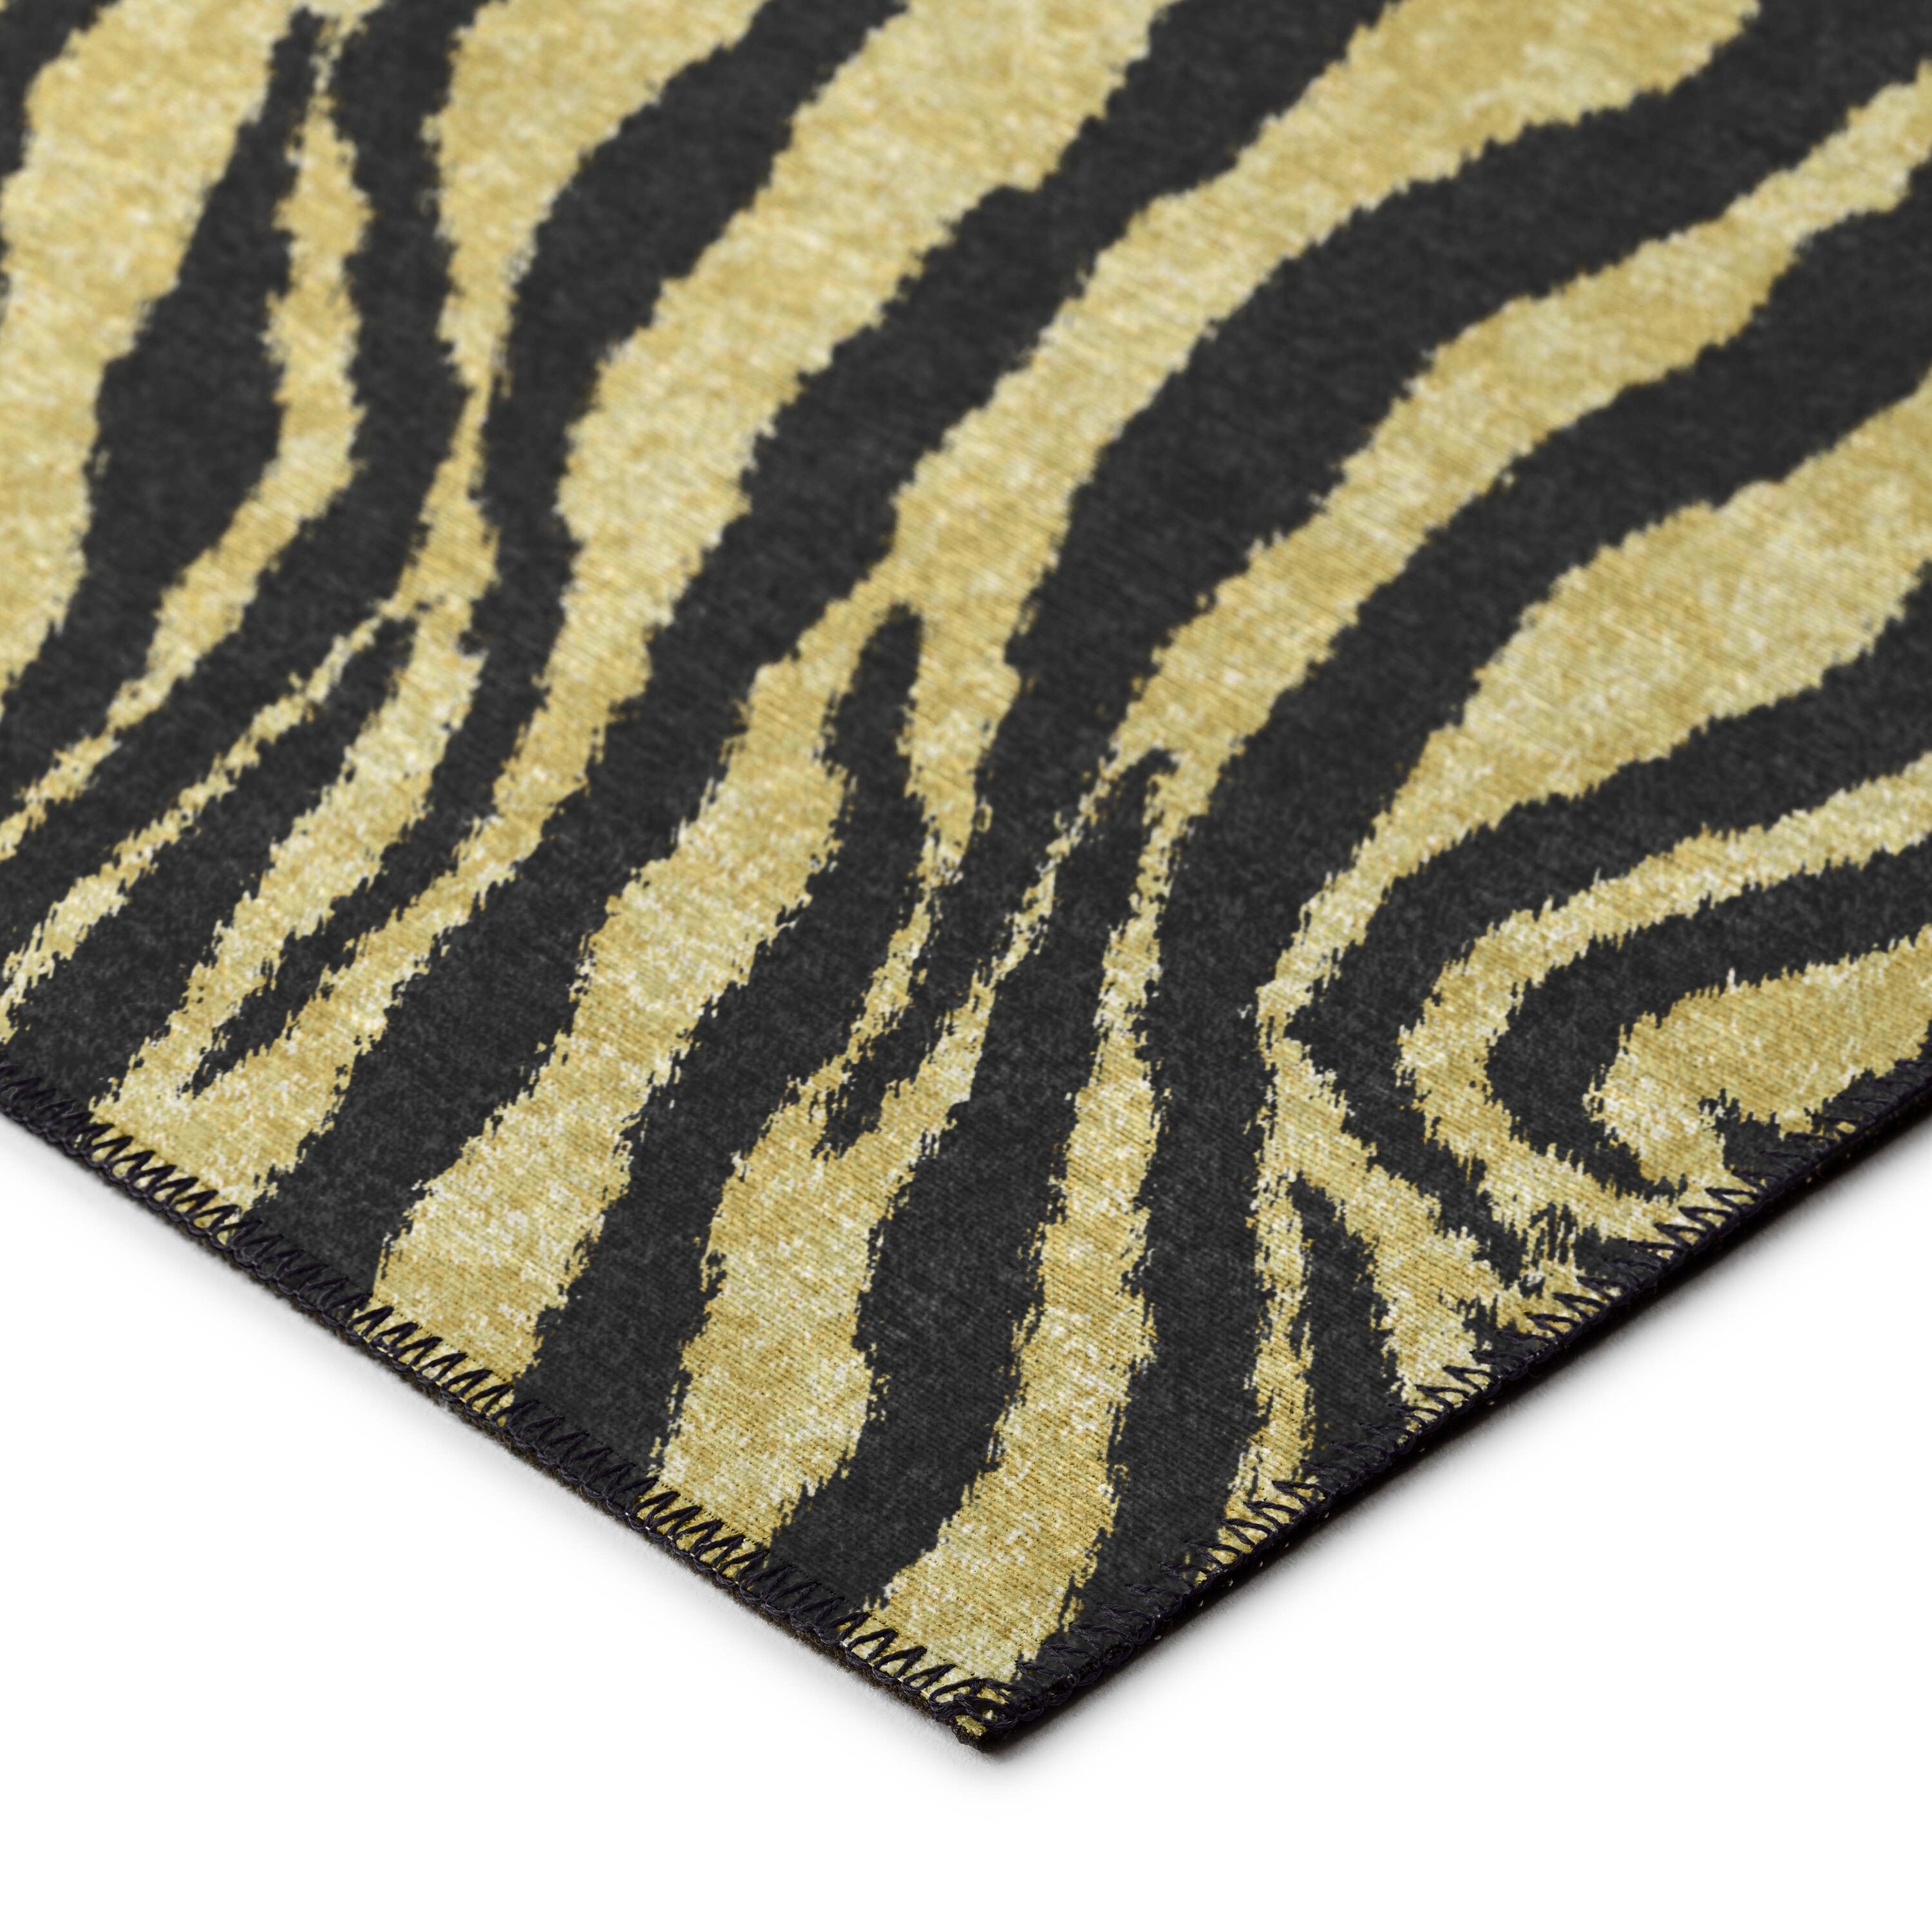 Addison Rugs Safari 8 x 10 Gilded Indoor/Outdoor Animal Print  Bohemian/Eclectic Area Rug in the Rugs department at